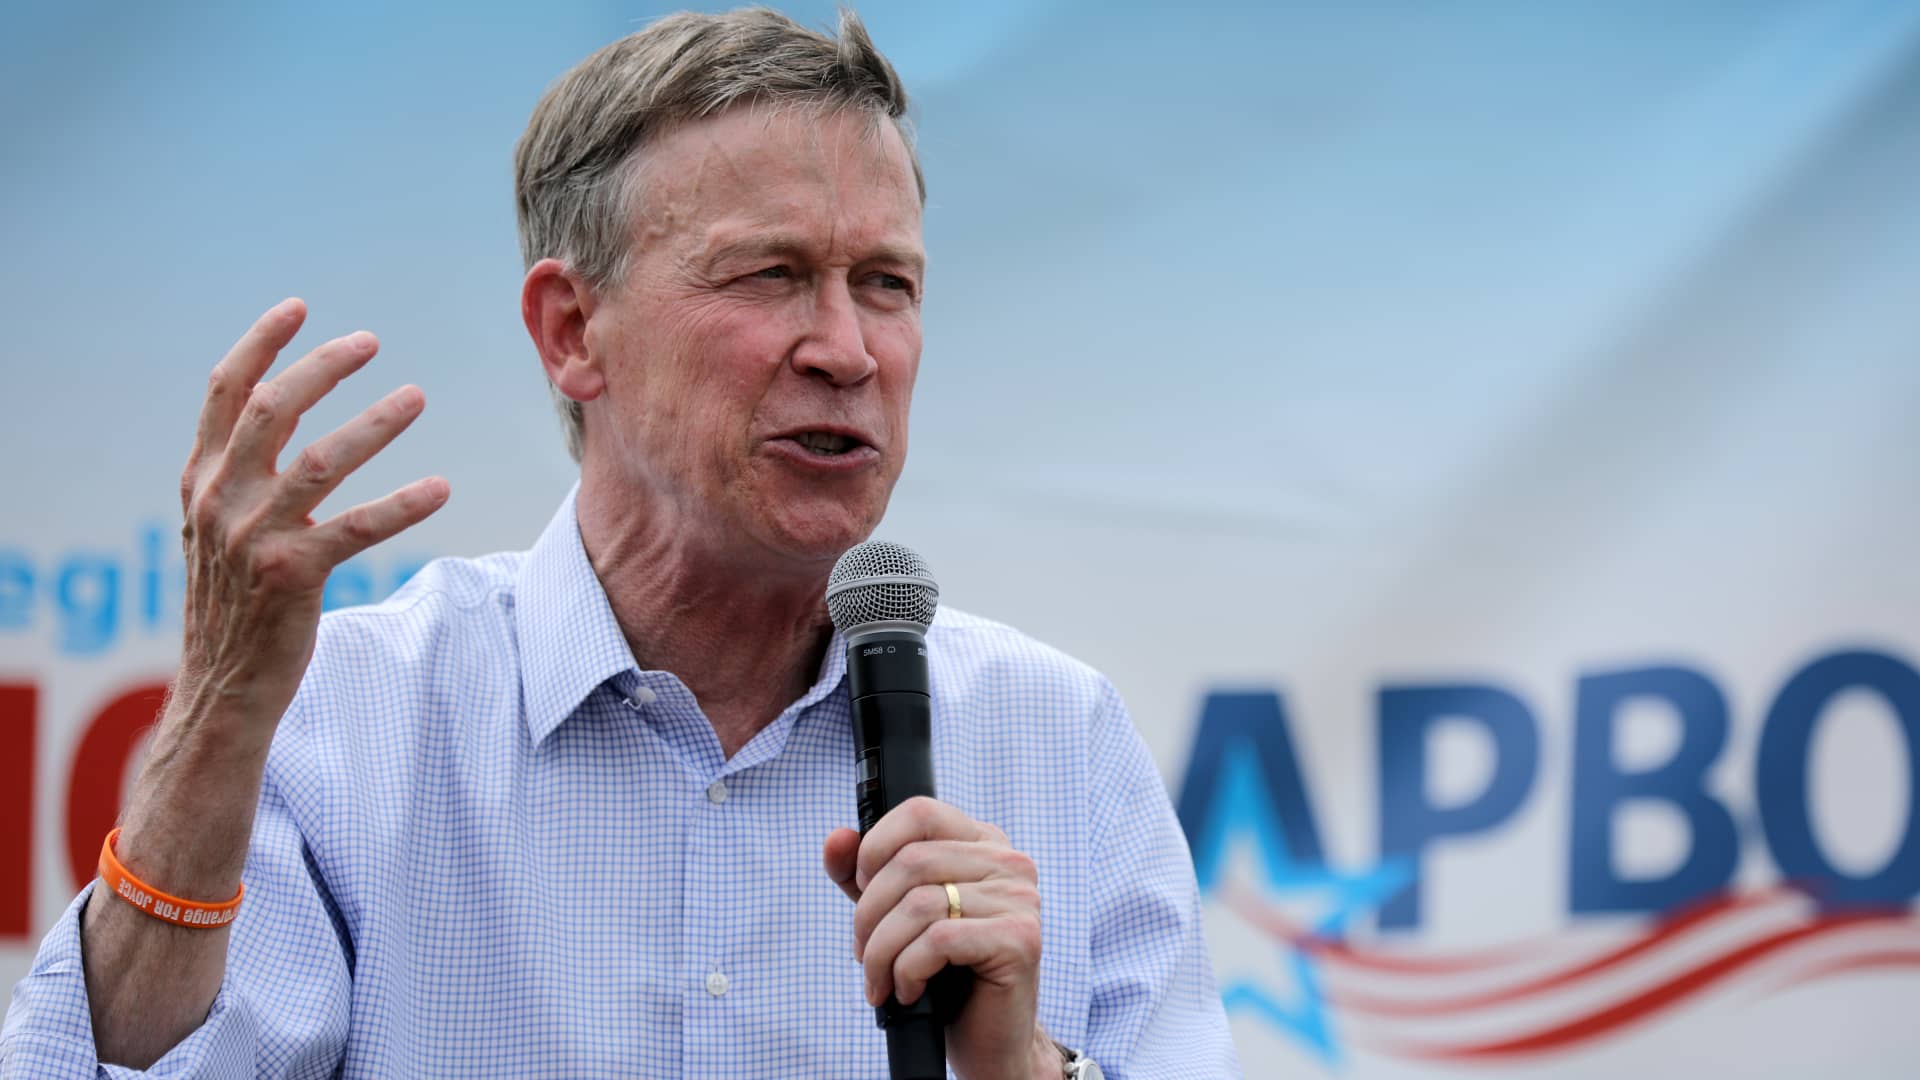 Former Colorado Governor John Hickenlooper delivers a 20-minute campaign speech at the Des Moines Register Political Soapbox at the Iowa State Fair August 10, 2019 in Des Moines, Iowa.